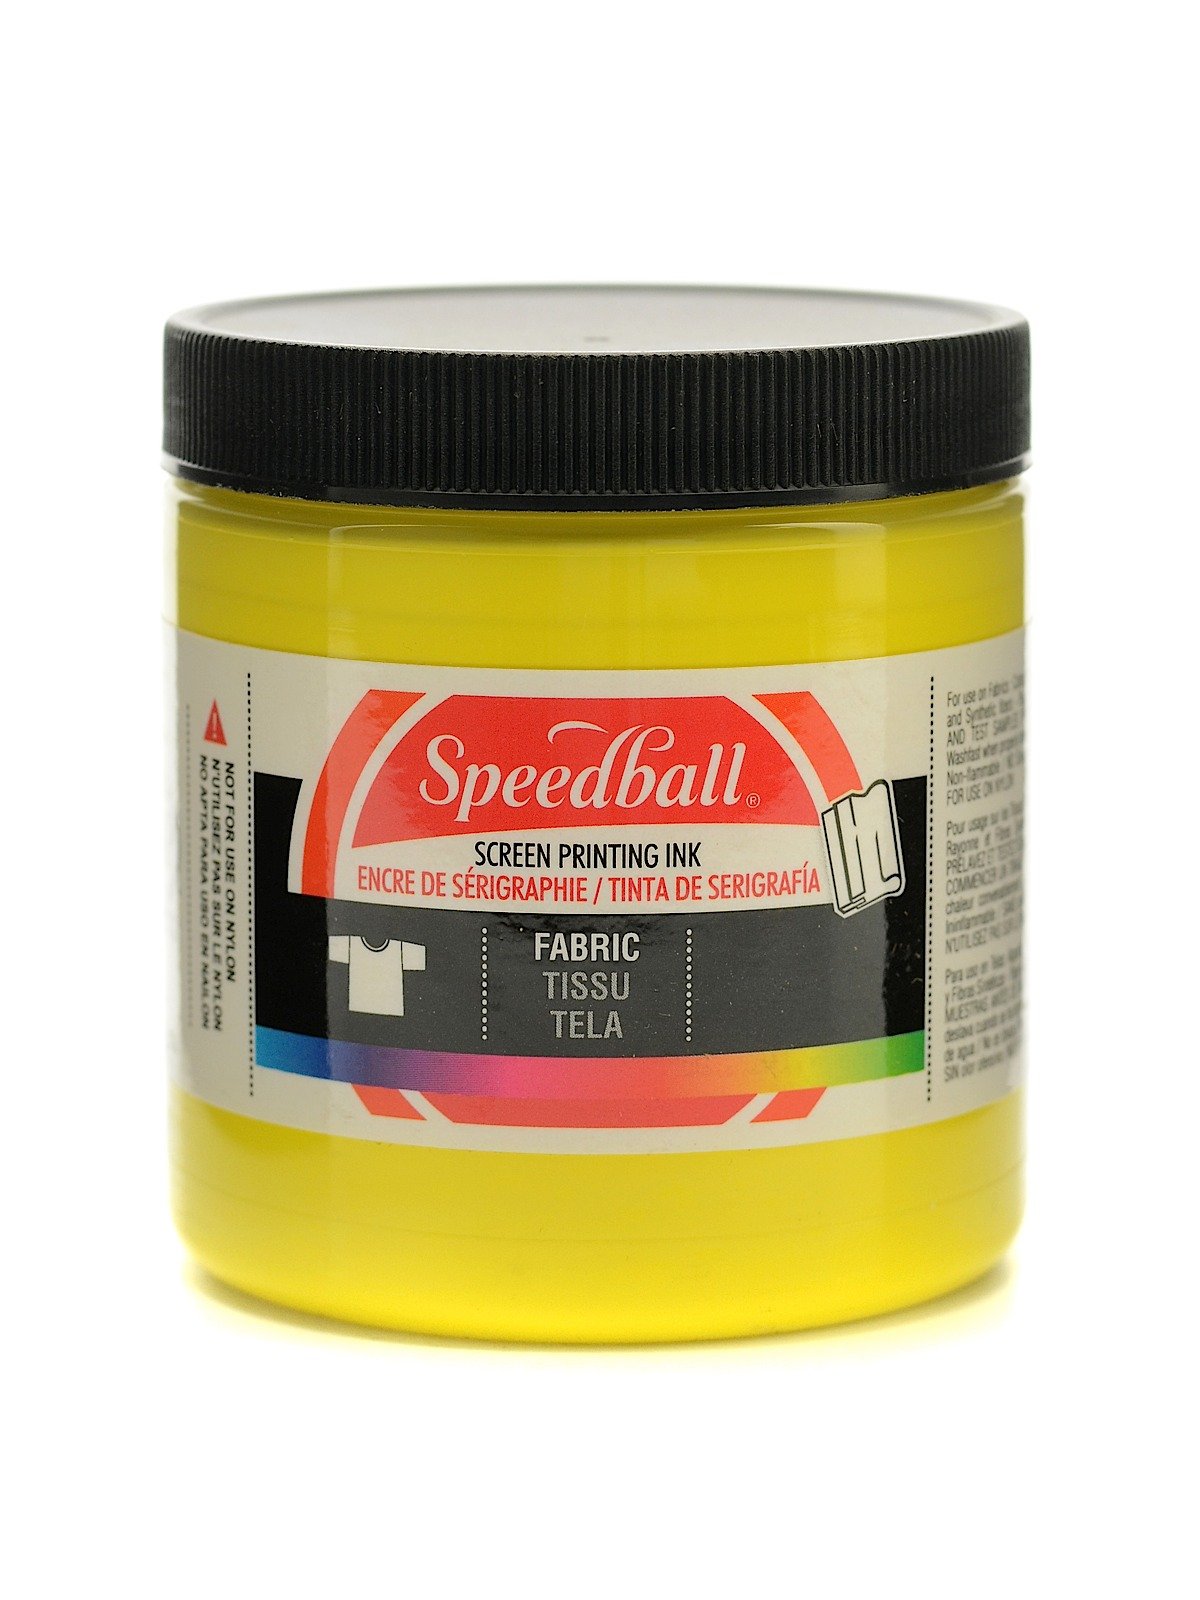 Curing Speedball Water Based Screen Printing Ink Fast